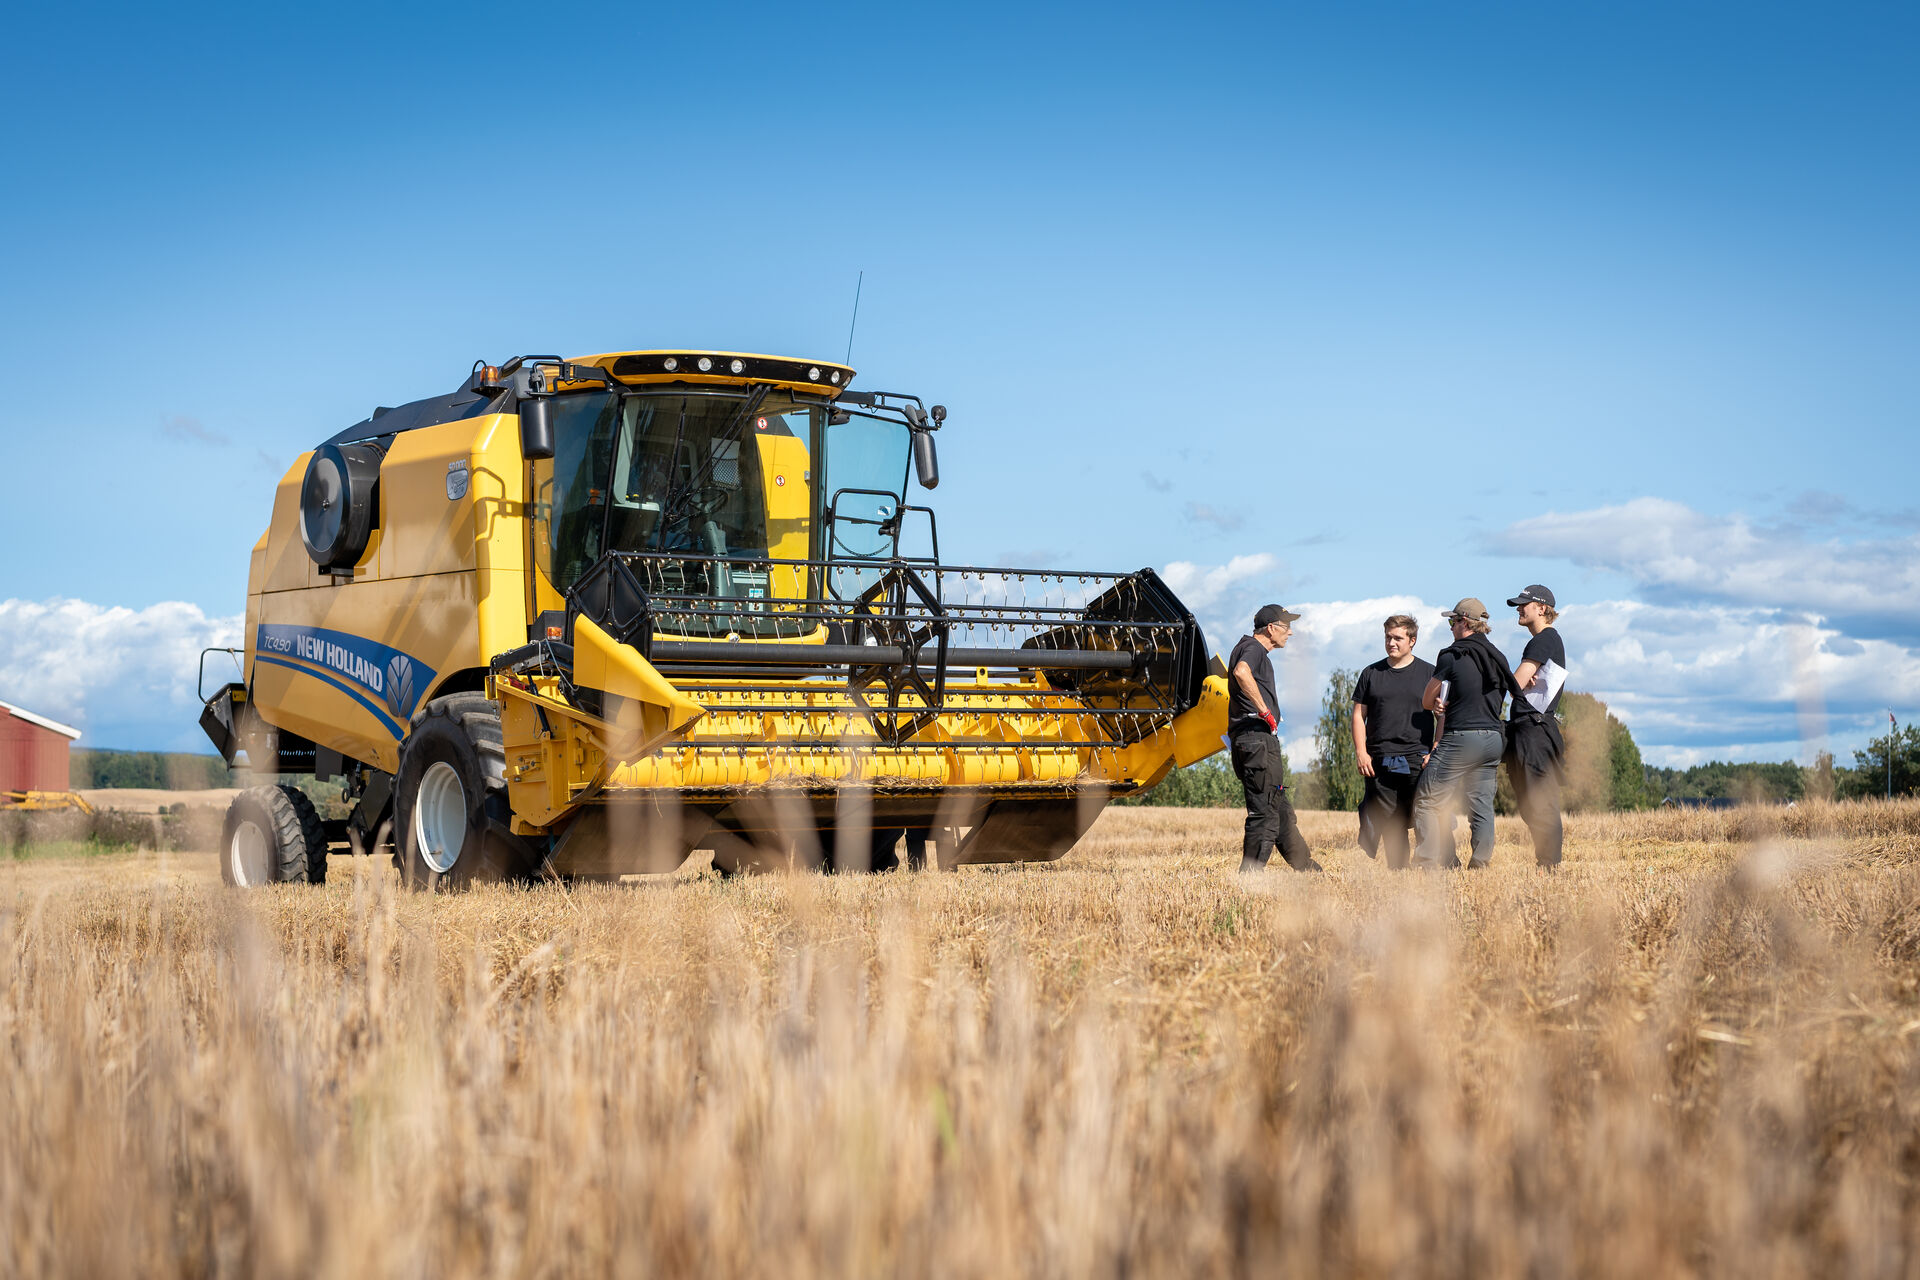 An agricultural machine stands in the cornfield at Blæstad. Four students are standing next to it, talking to each other.